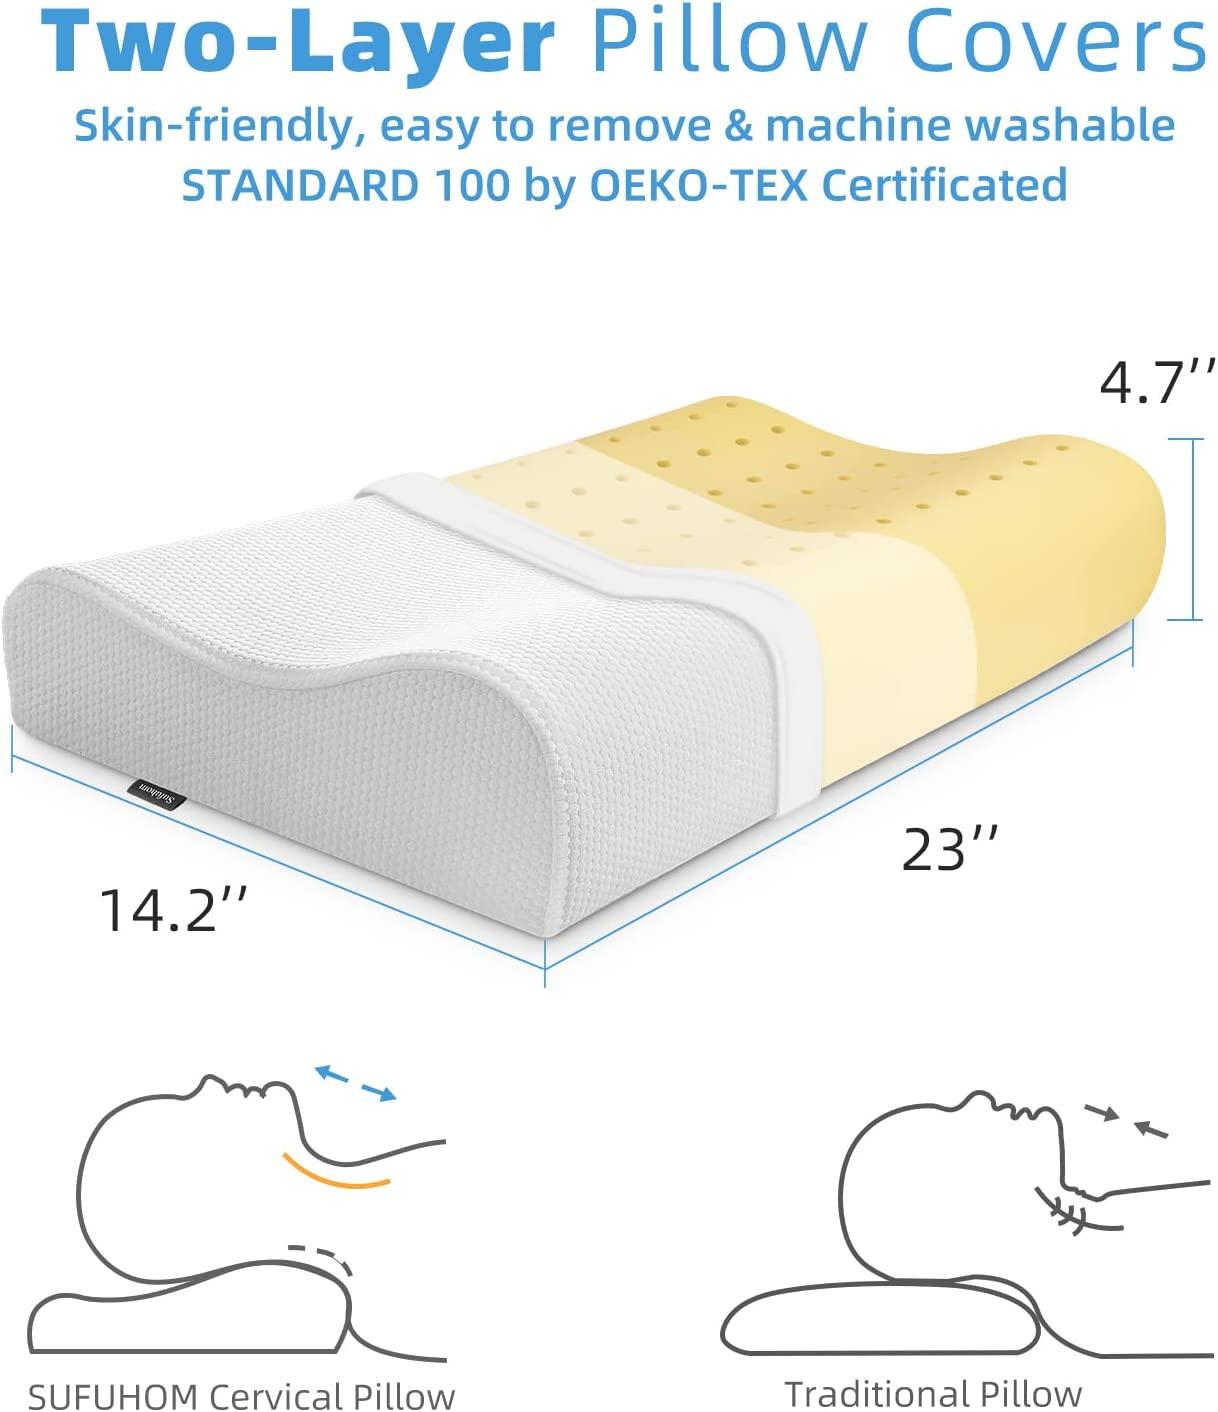 Sleep Innovations Contour Memory Foam Pillow, Standard Size, Cervical  Support Pillow for Sleeping, 5-Year Warranty